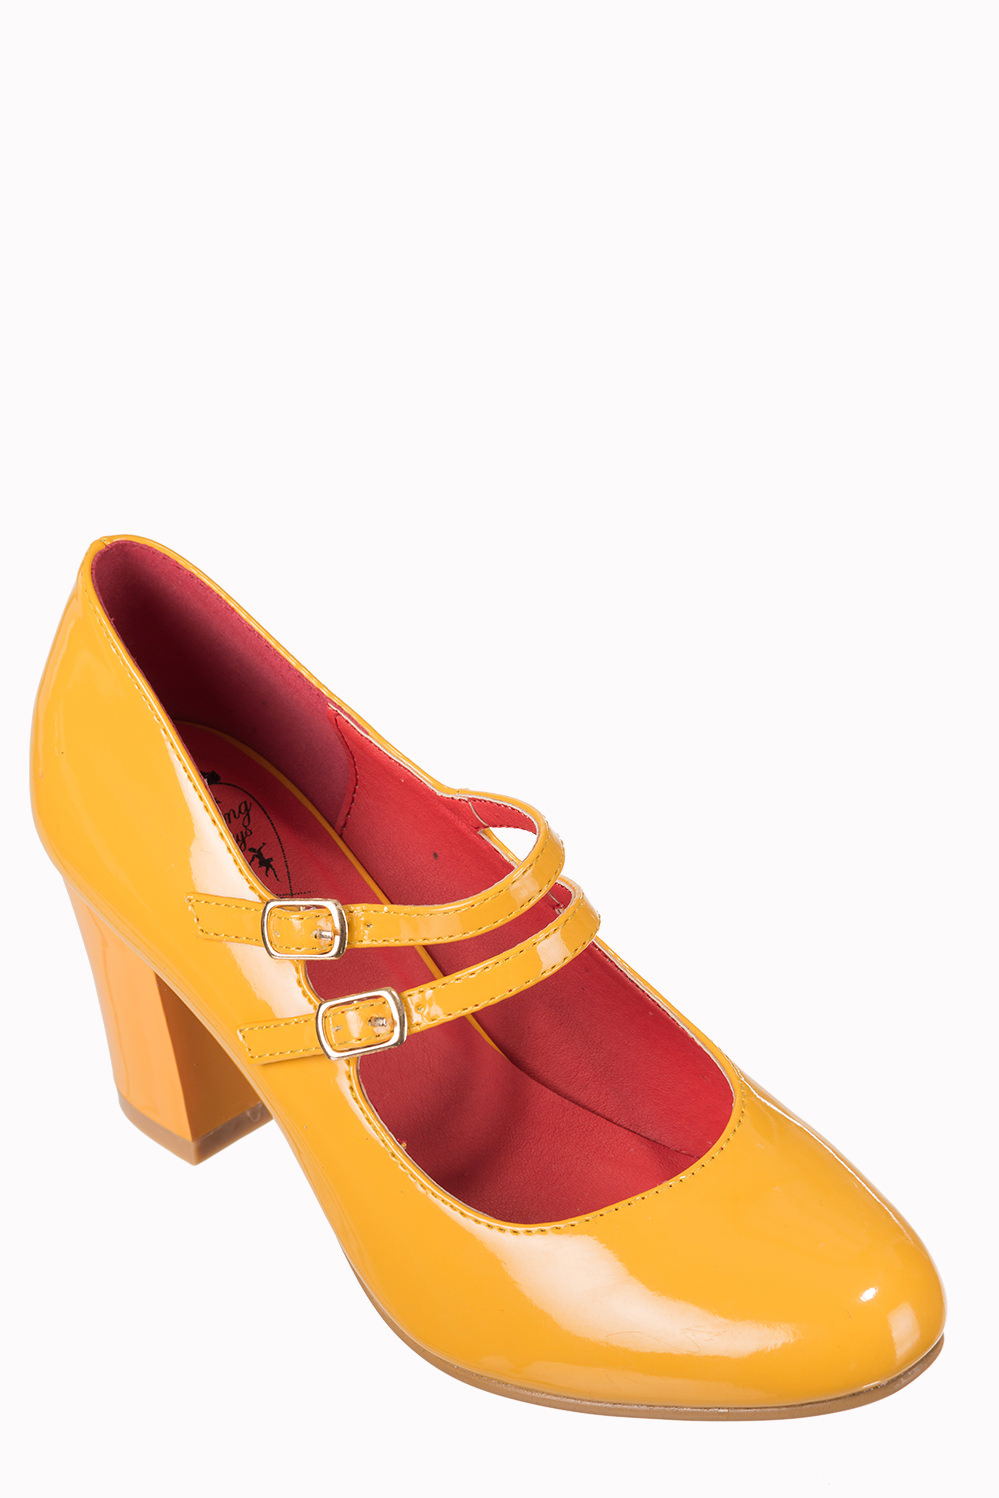 Dancing Days Golden Years 60s Patent Mustard Shoes